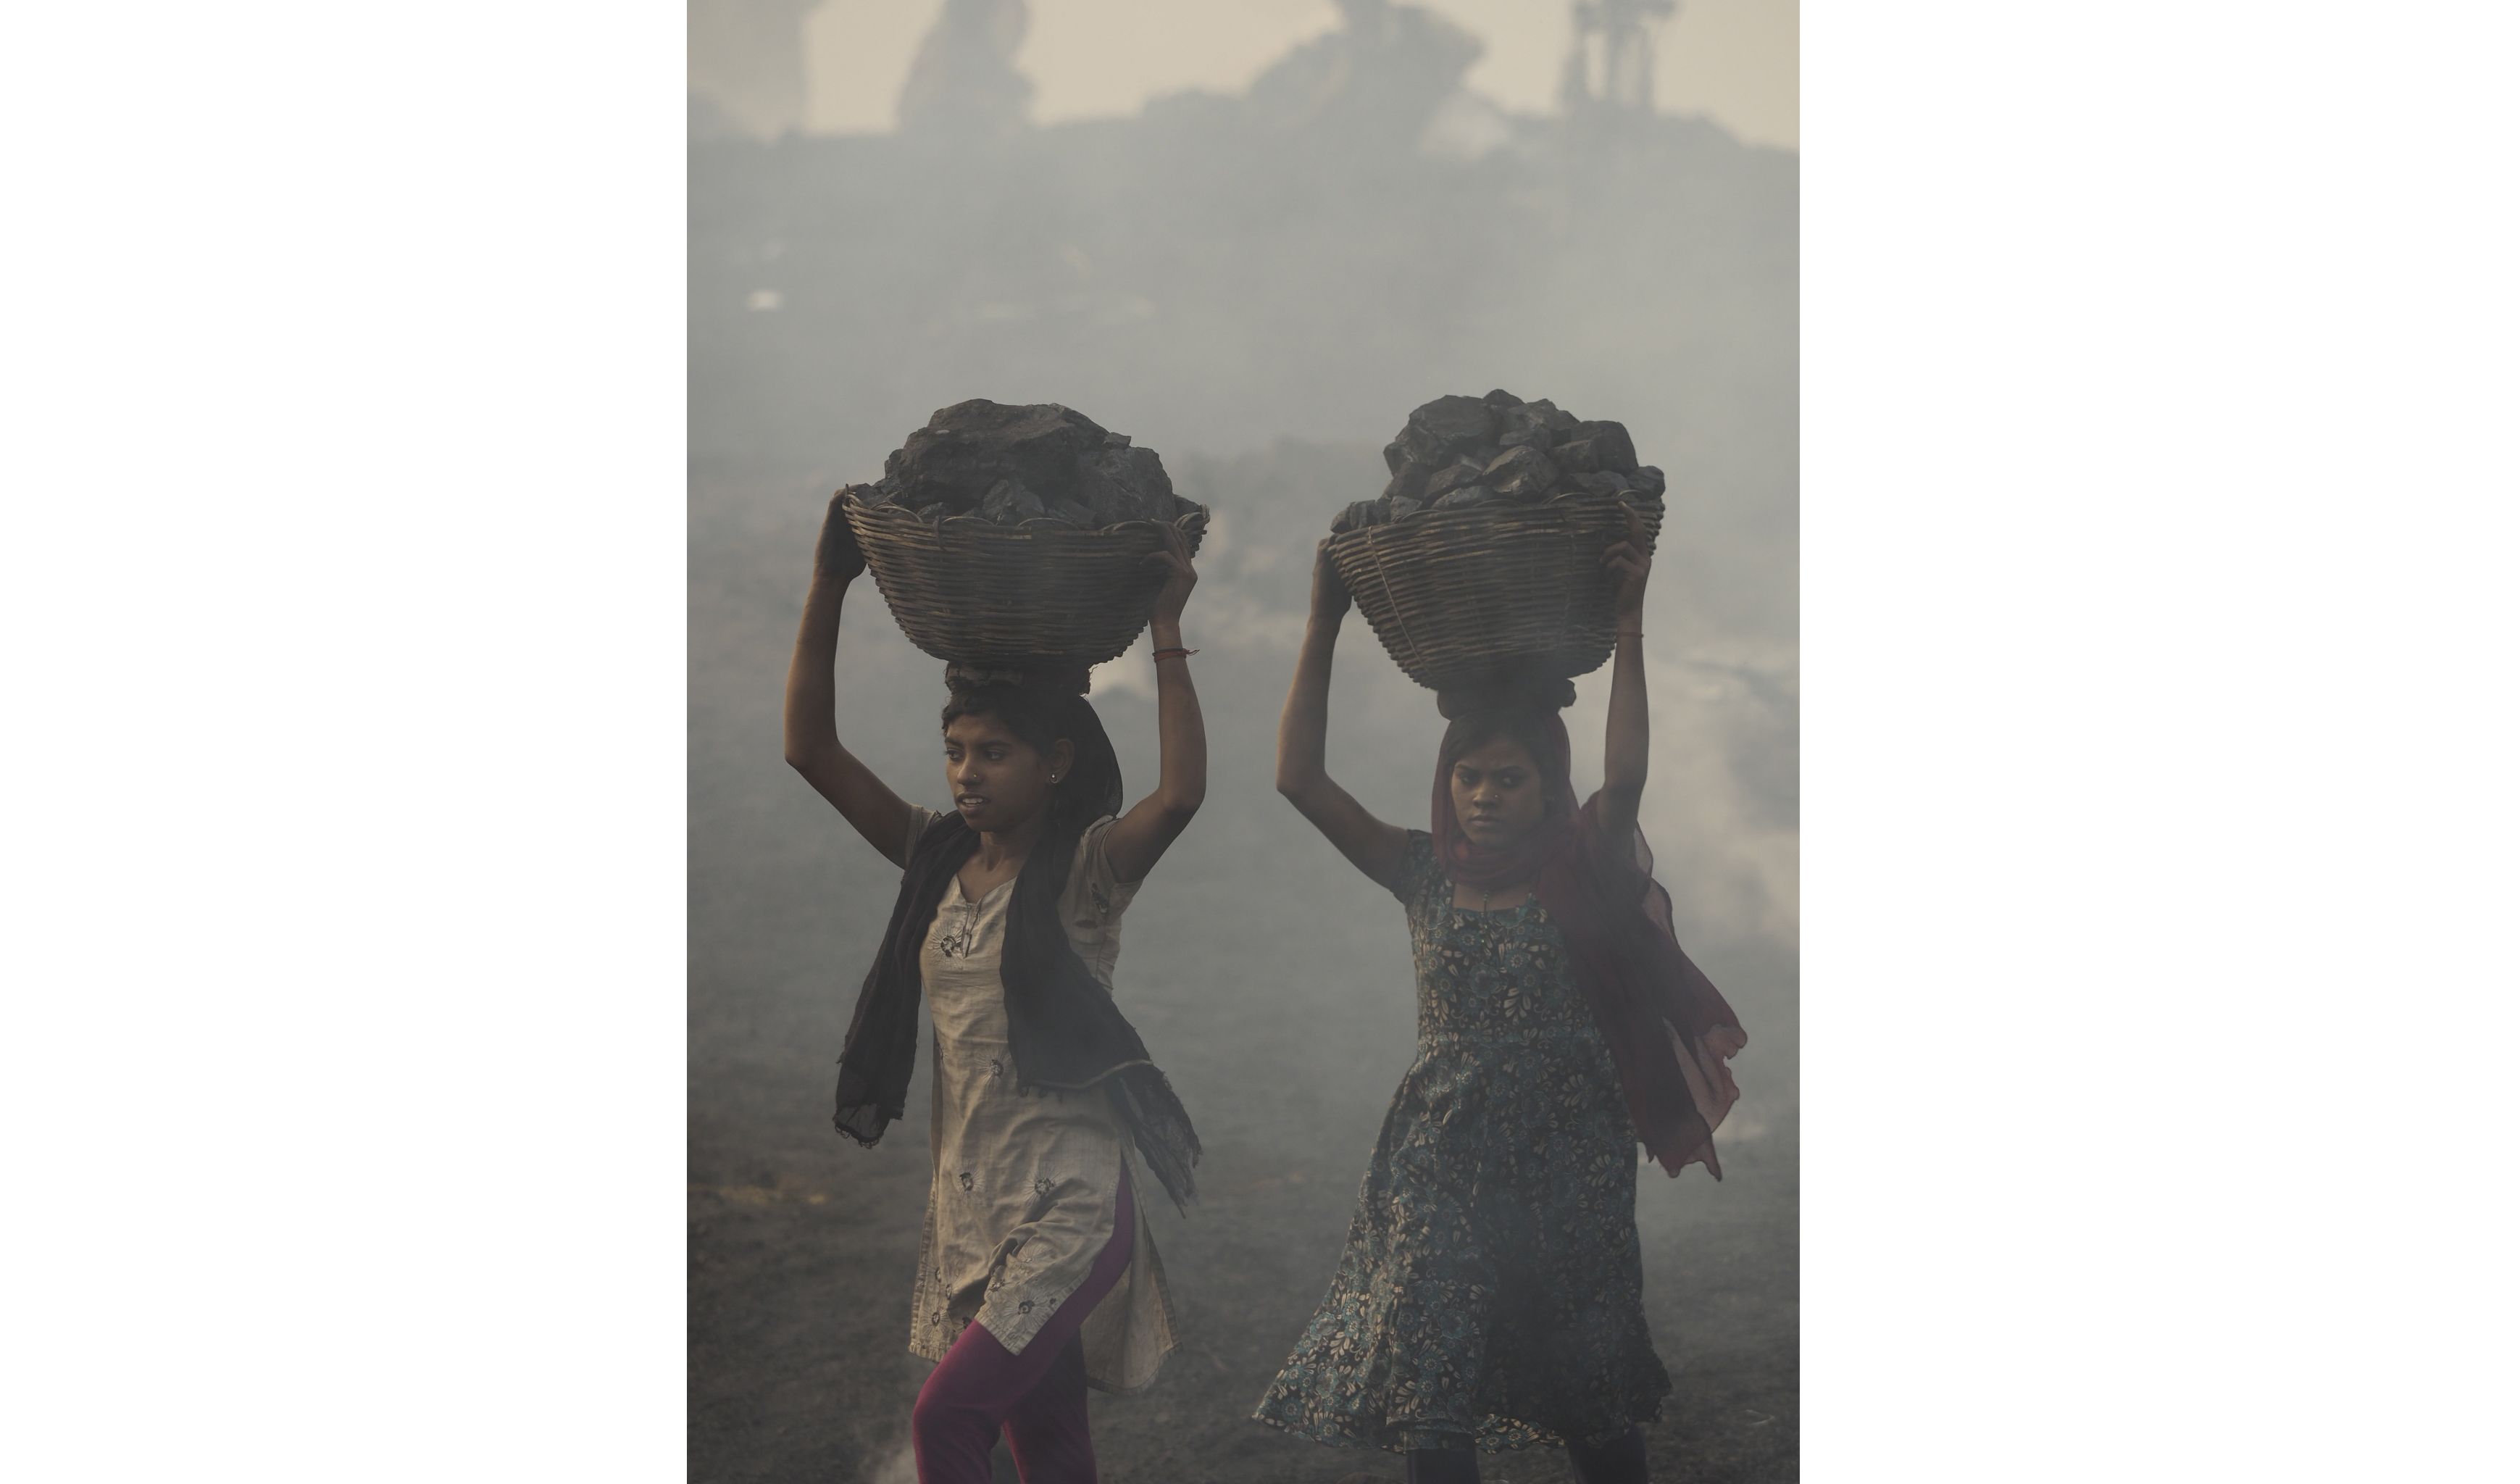 Women carry scavenged coal from the bottom of the Alkusha Coalfield. Image by Larry C. Price. India, 2016.